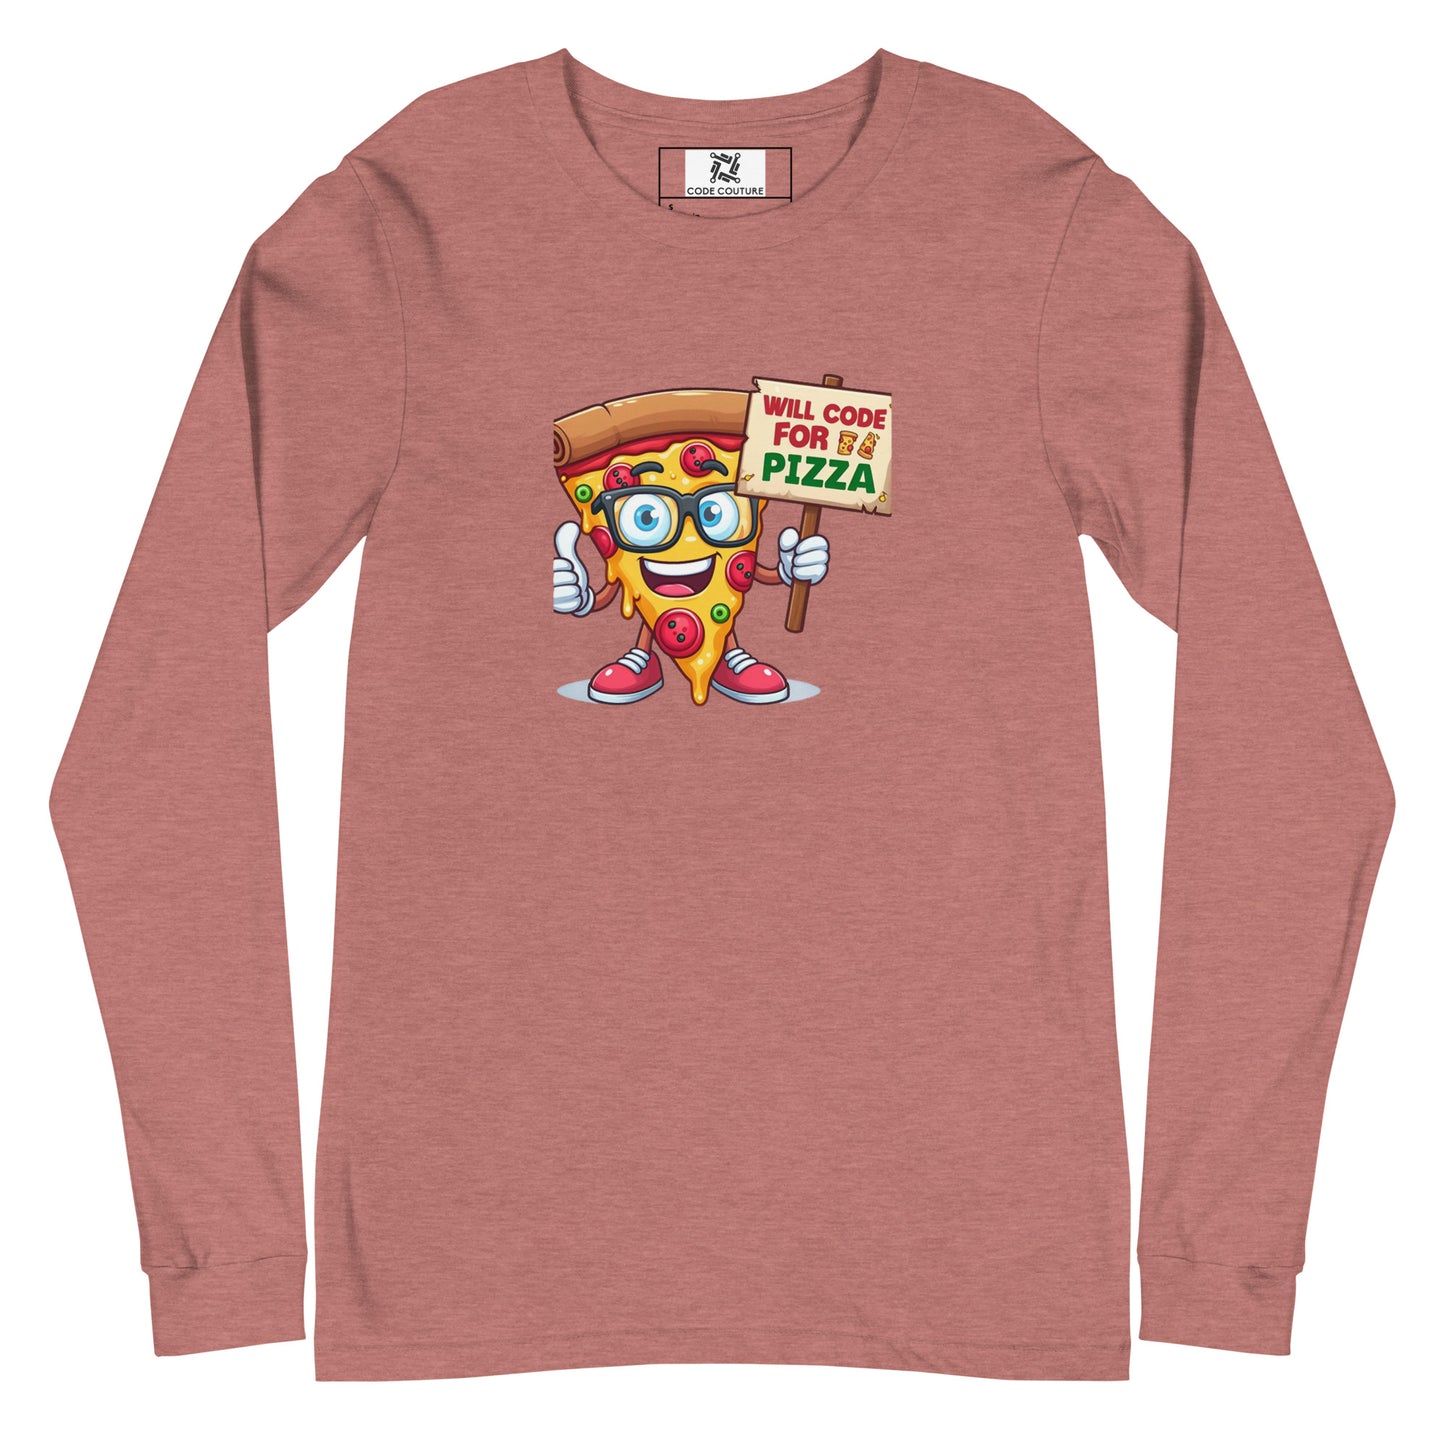 Code For Pizza Long Sleeve